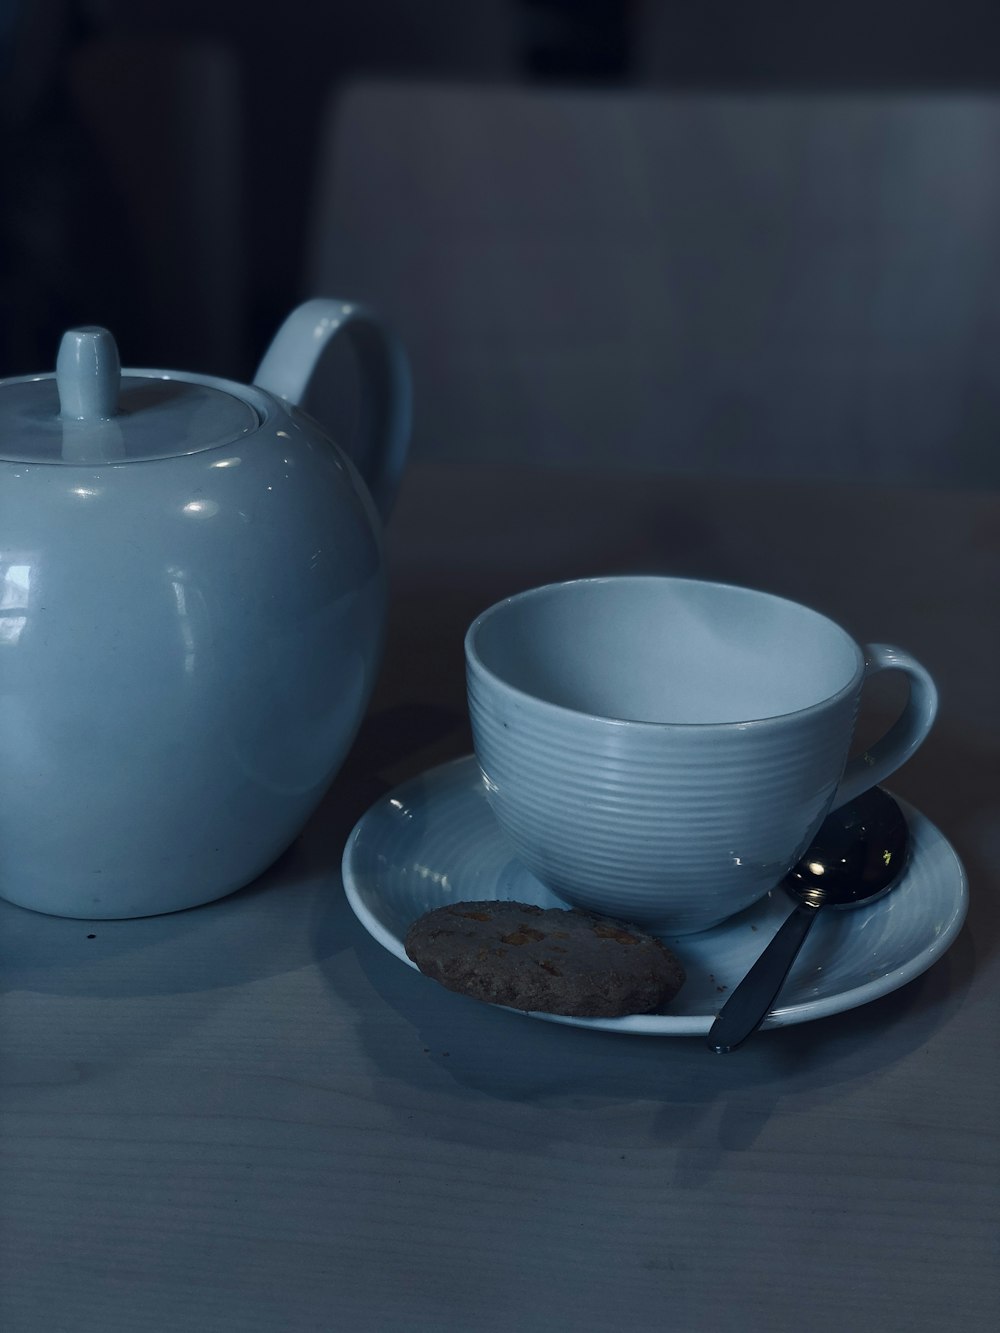 a tea pot and a plate with a cookie on it